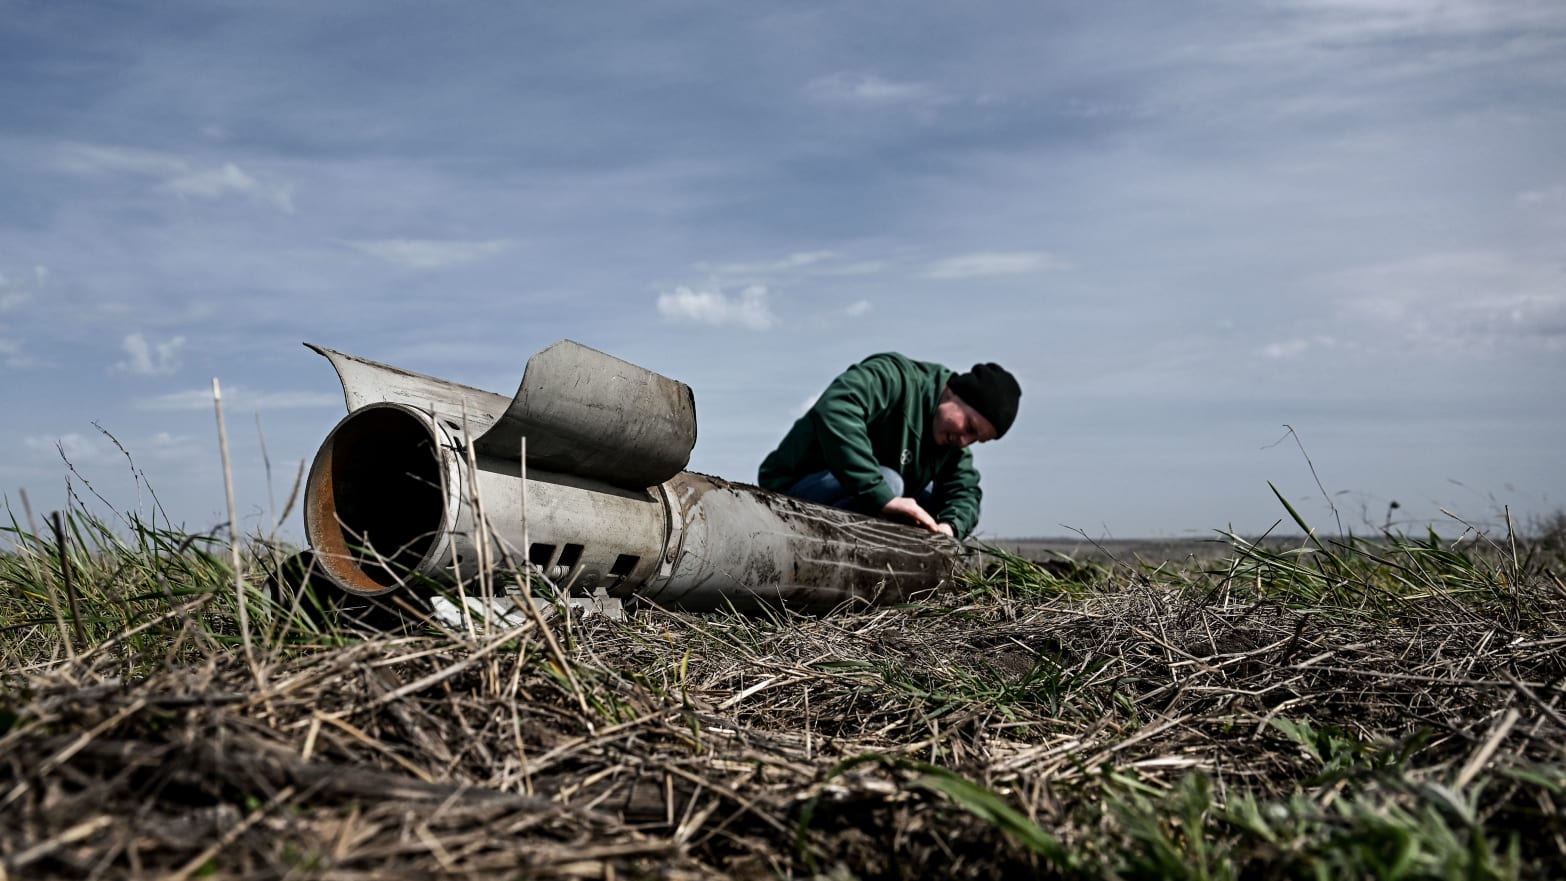 A photograph of a farmer examining a Russian rocket pulled out of the ground during a sowing campaign in southeastern Ukraine on April 18, 2023.